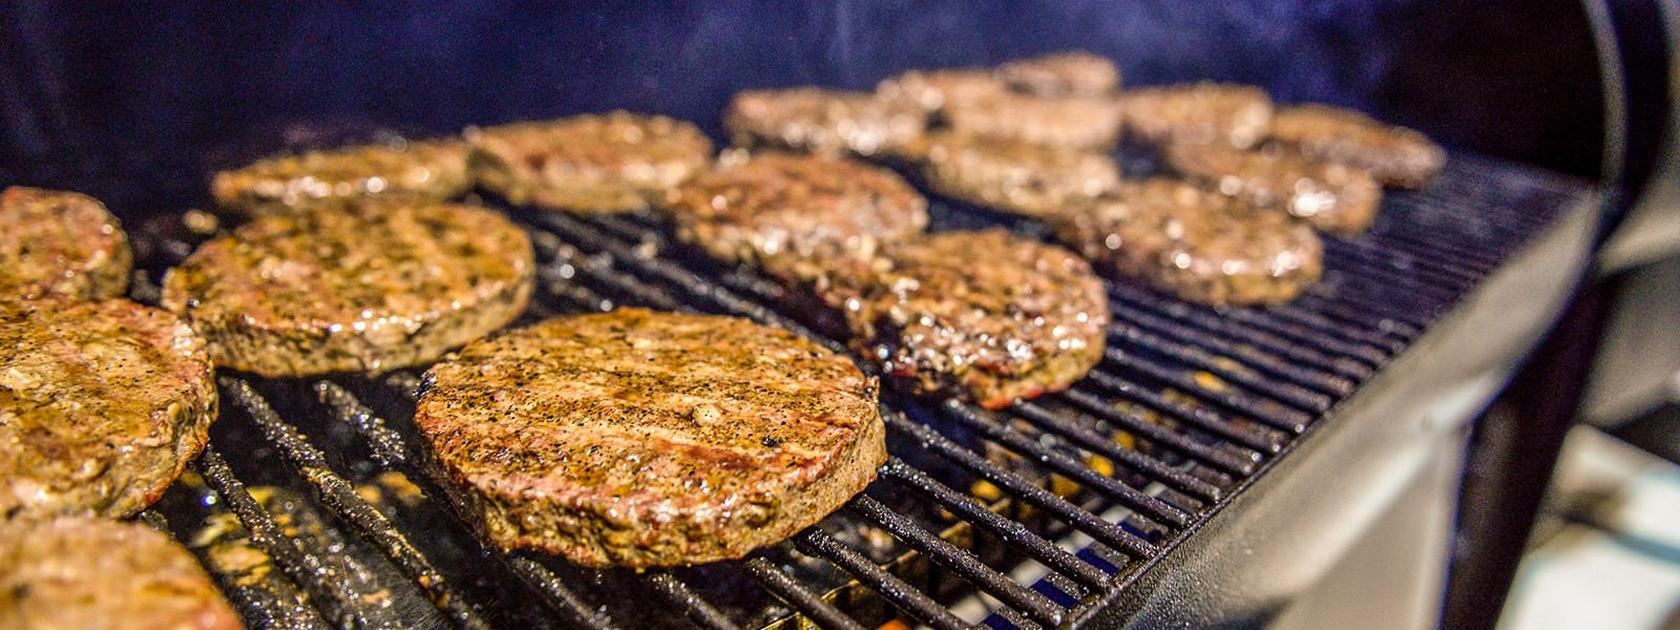 How to Grill Burgers on a Pellet Grill